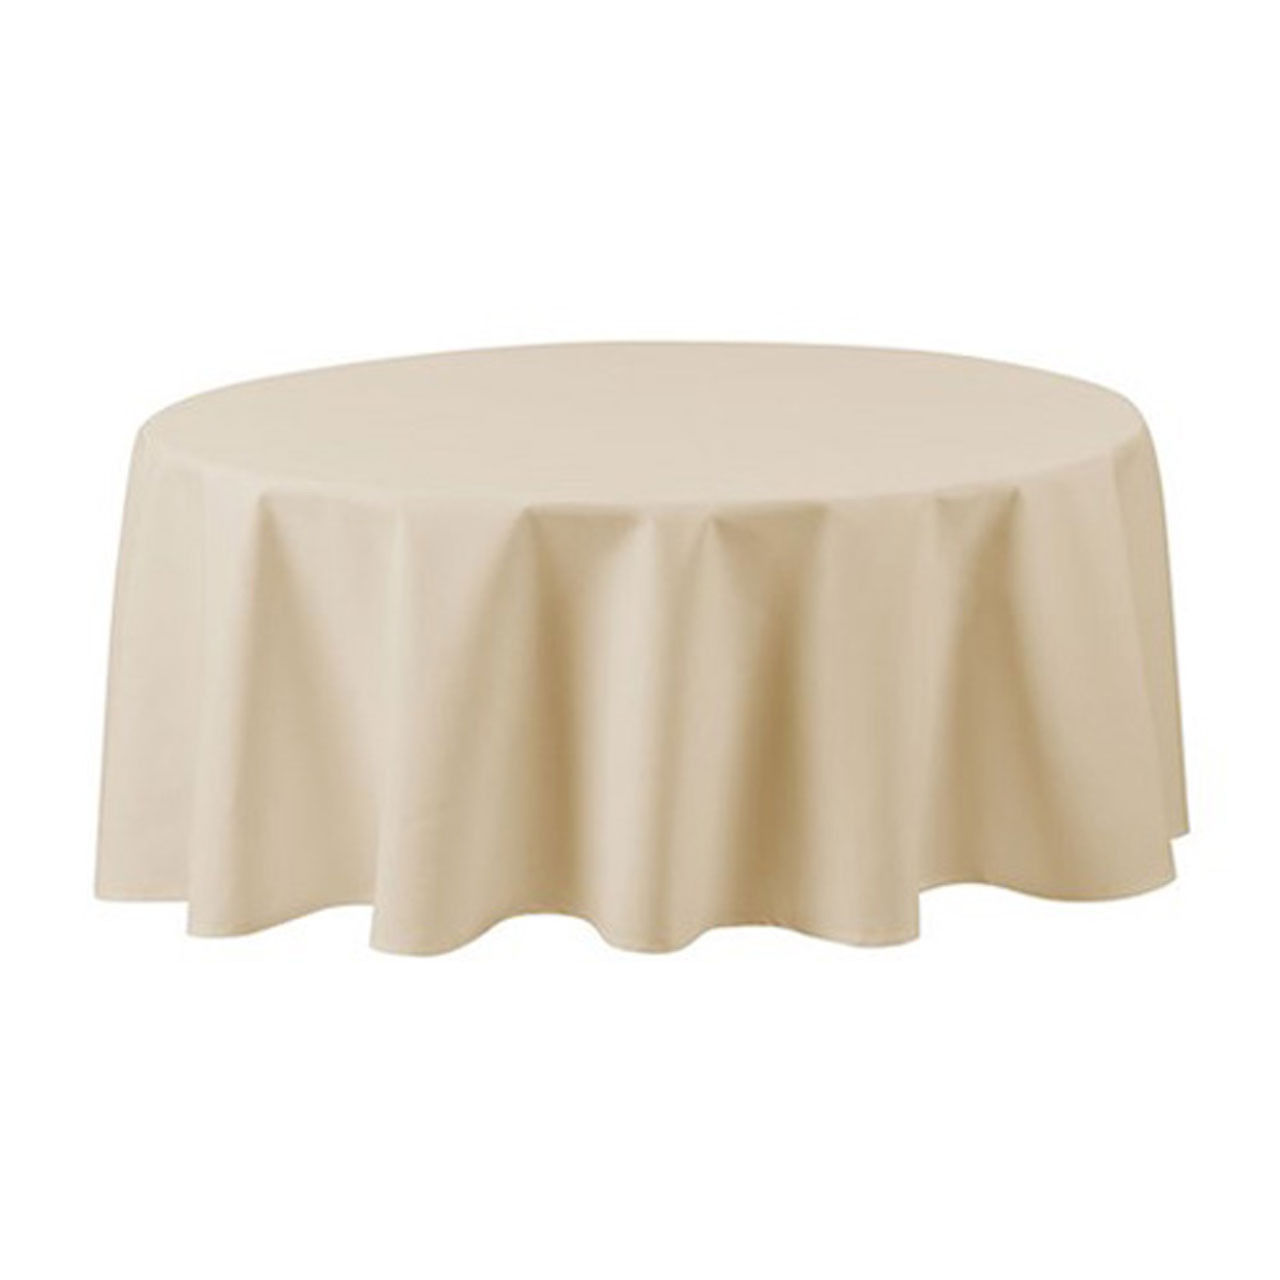 How to save money on tablecloths for wedding?